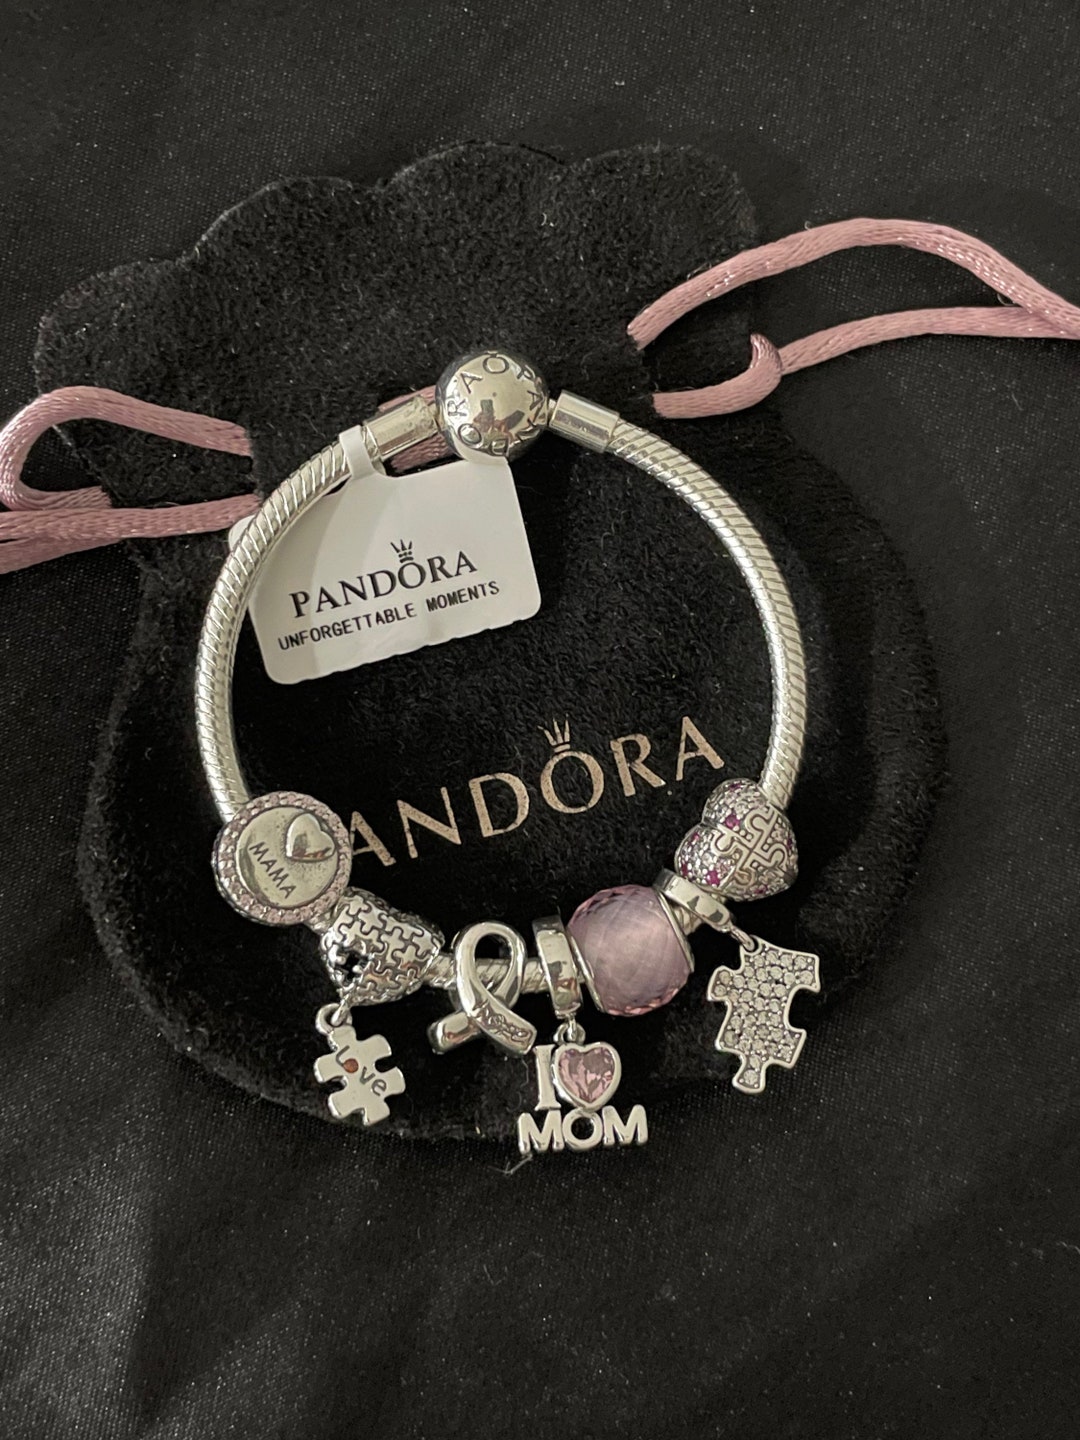 Pandora Bracelet With Autism Mom Themed Charms - Etsy